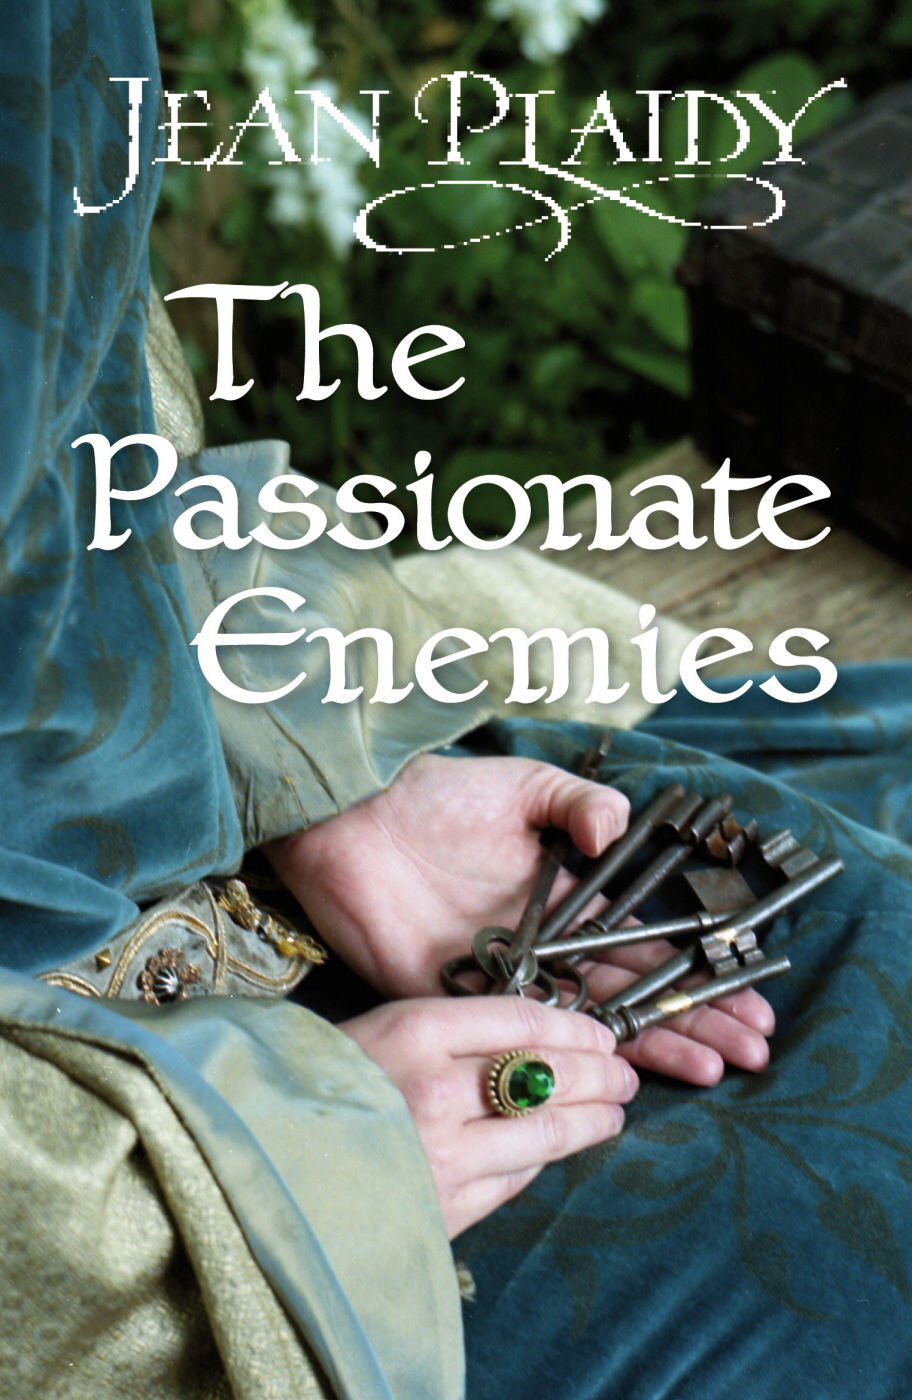 The Passionate Enemies (2012) by Jean Plaidy